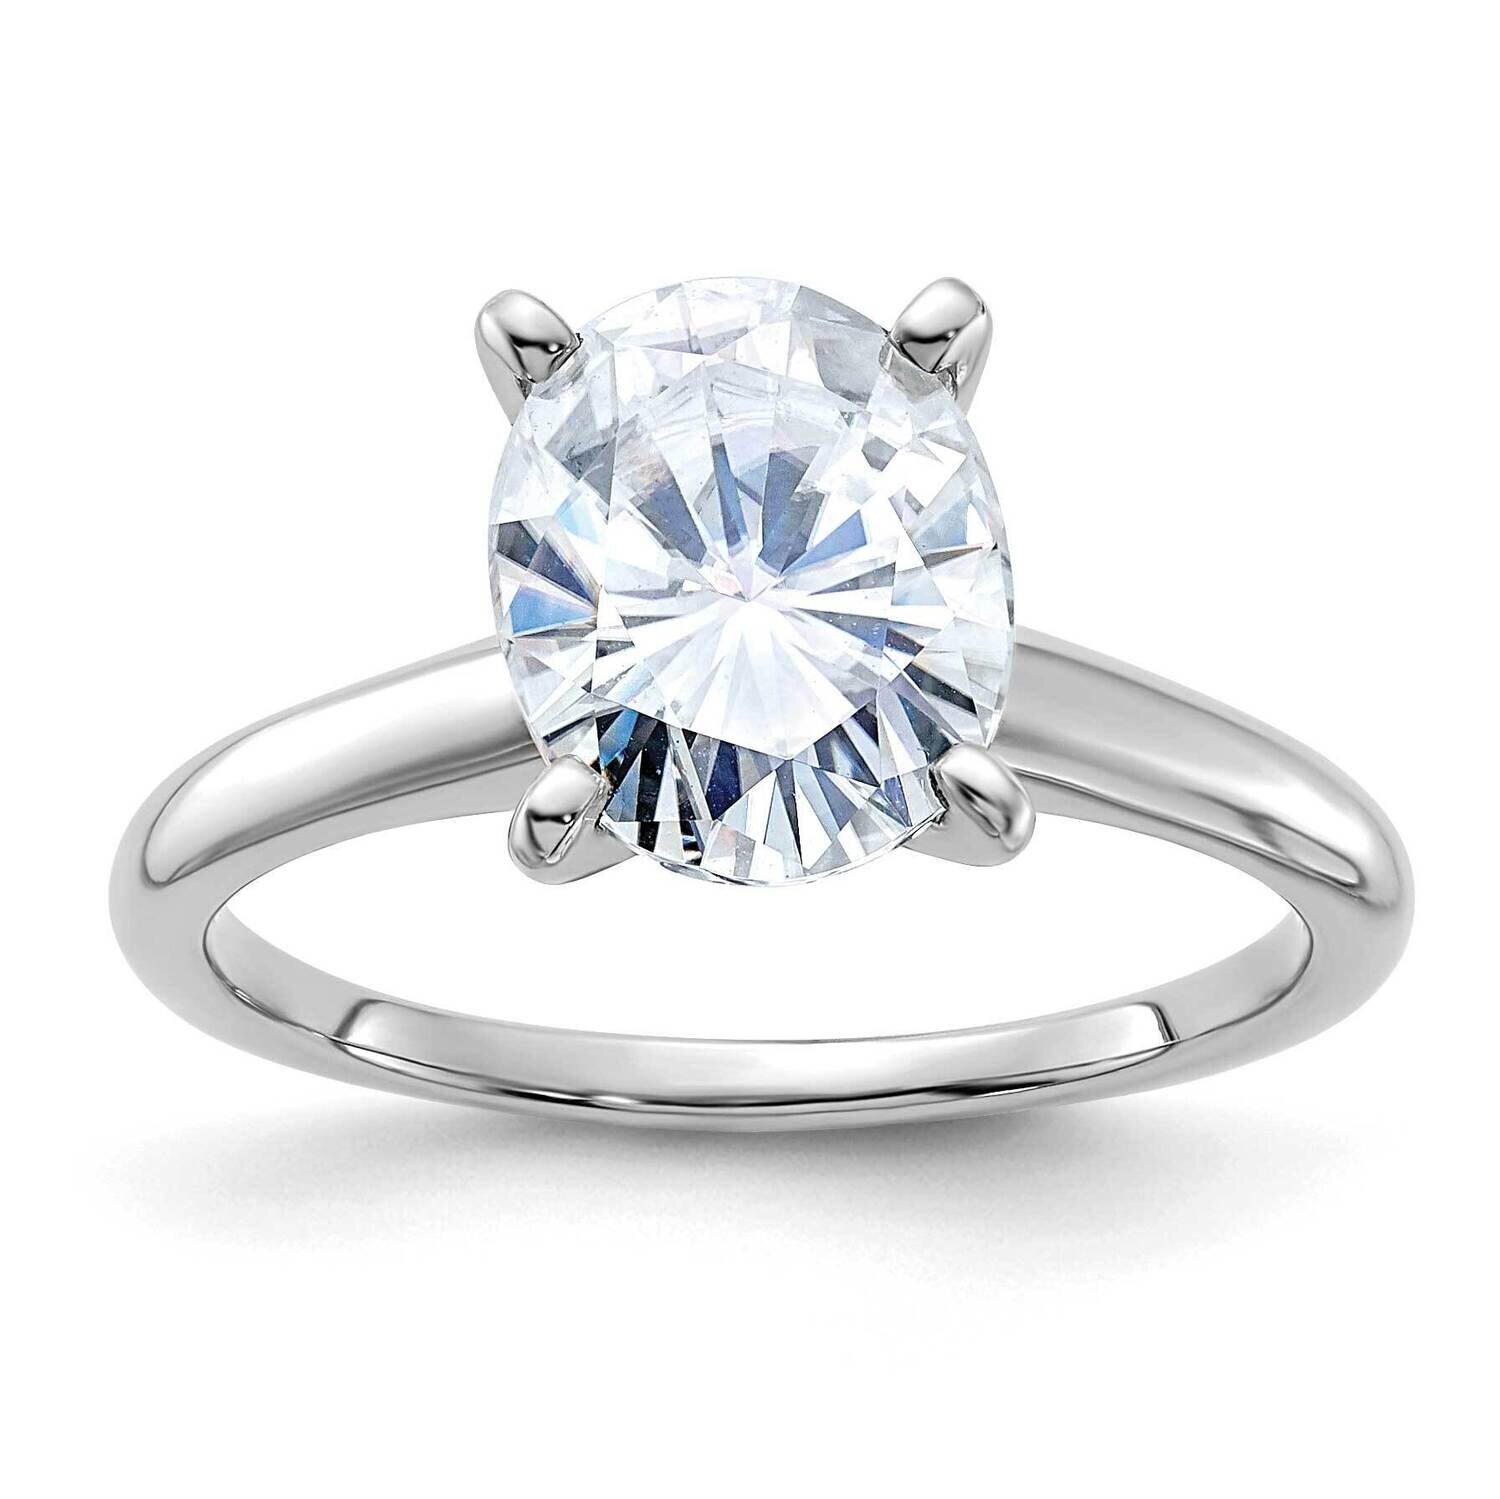 3ct. D E F Pure Light Oval Moissanite Solitaire Ring 14k White Gold RM5965WO-300-7MP